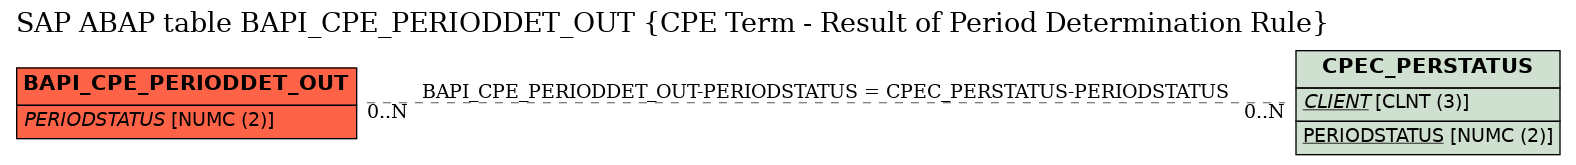 E-R Diagram for table BAPI_CPE_PERIODDET_OUT (CPE Term - Result of Period Determination Rule)